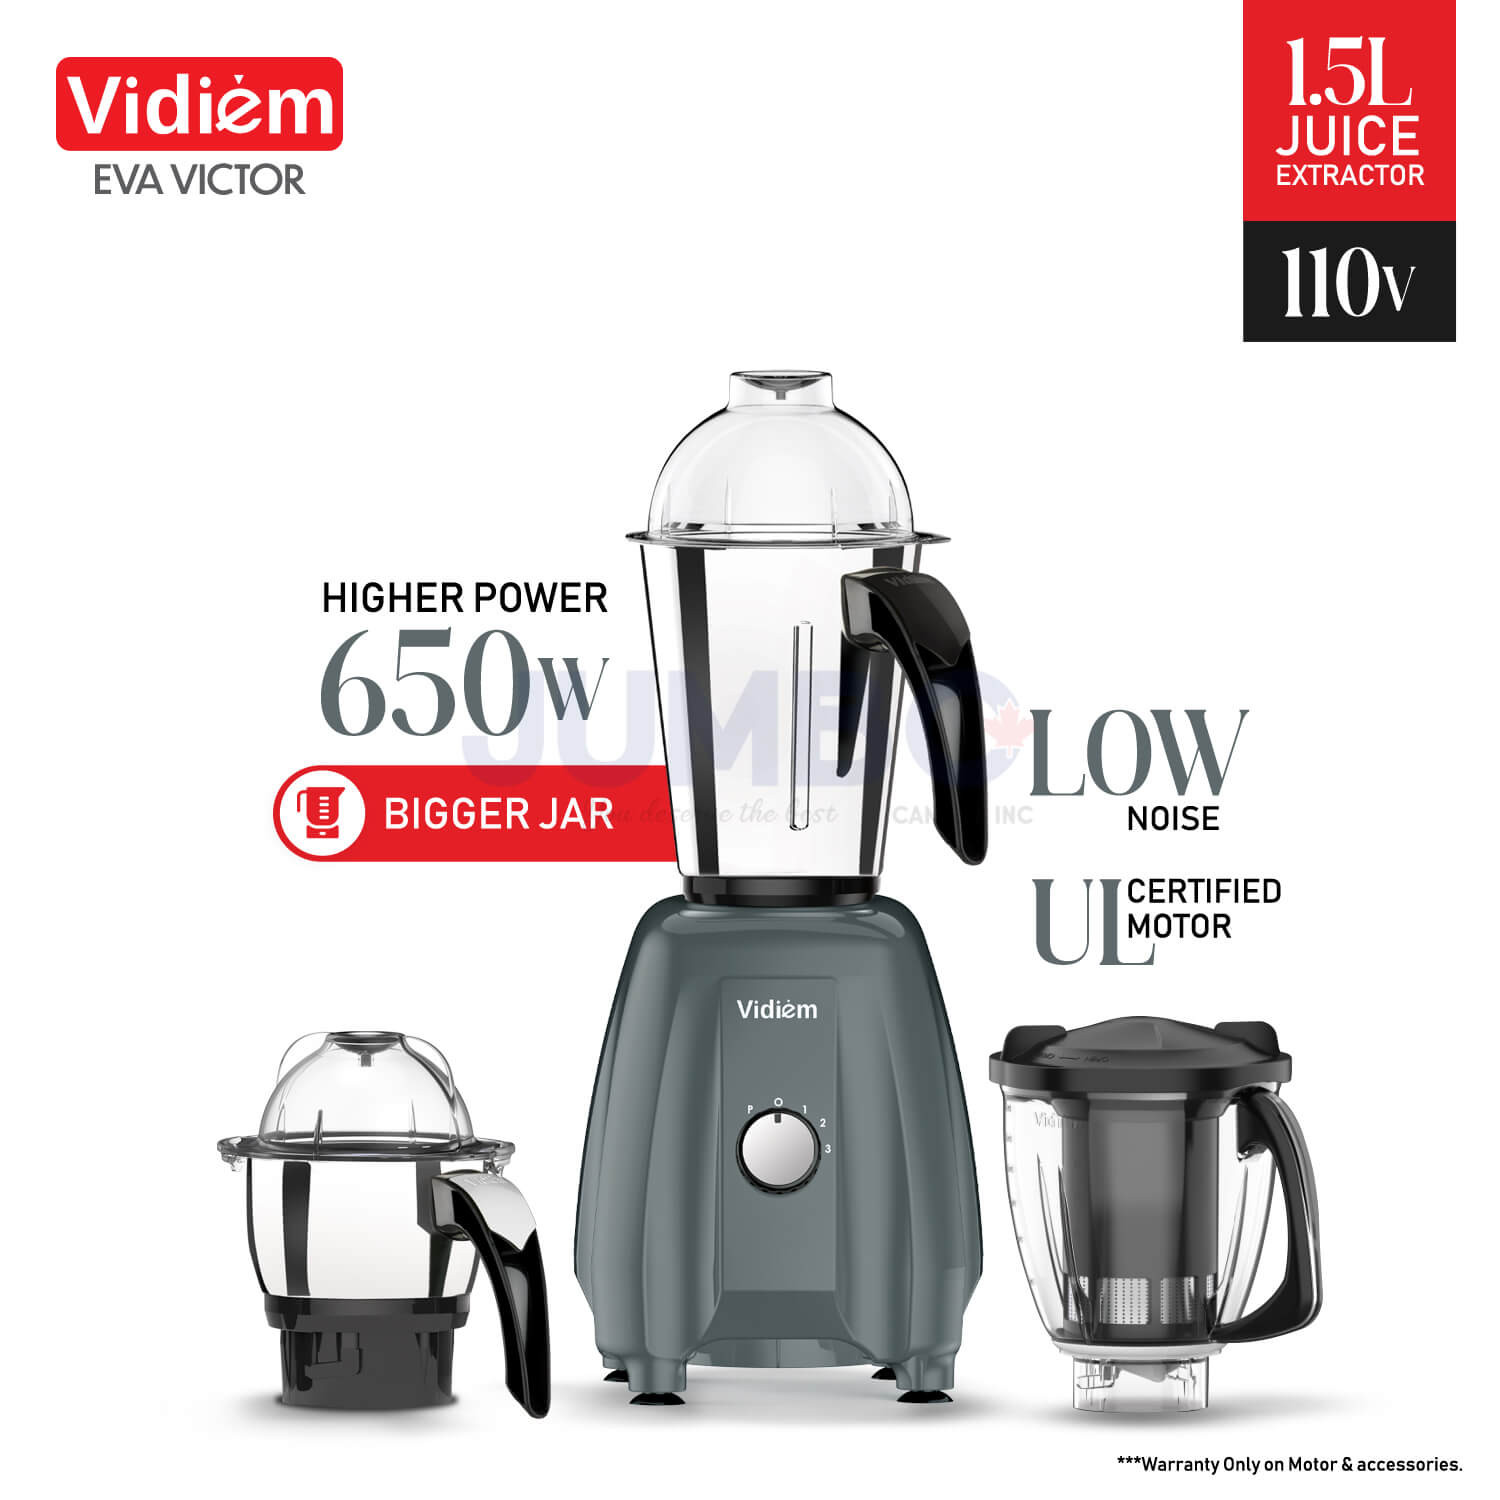 vidiem-eva-victor-650w-110v-stainless-steel-jars-indian-mixer-grinder-spice-coffee-grinder-with-almond-nut-milk-juice-extractor-for-use-in-canada-usa